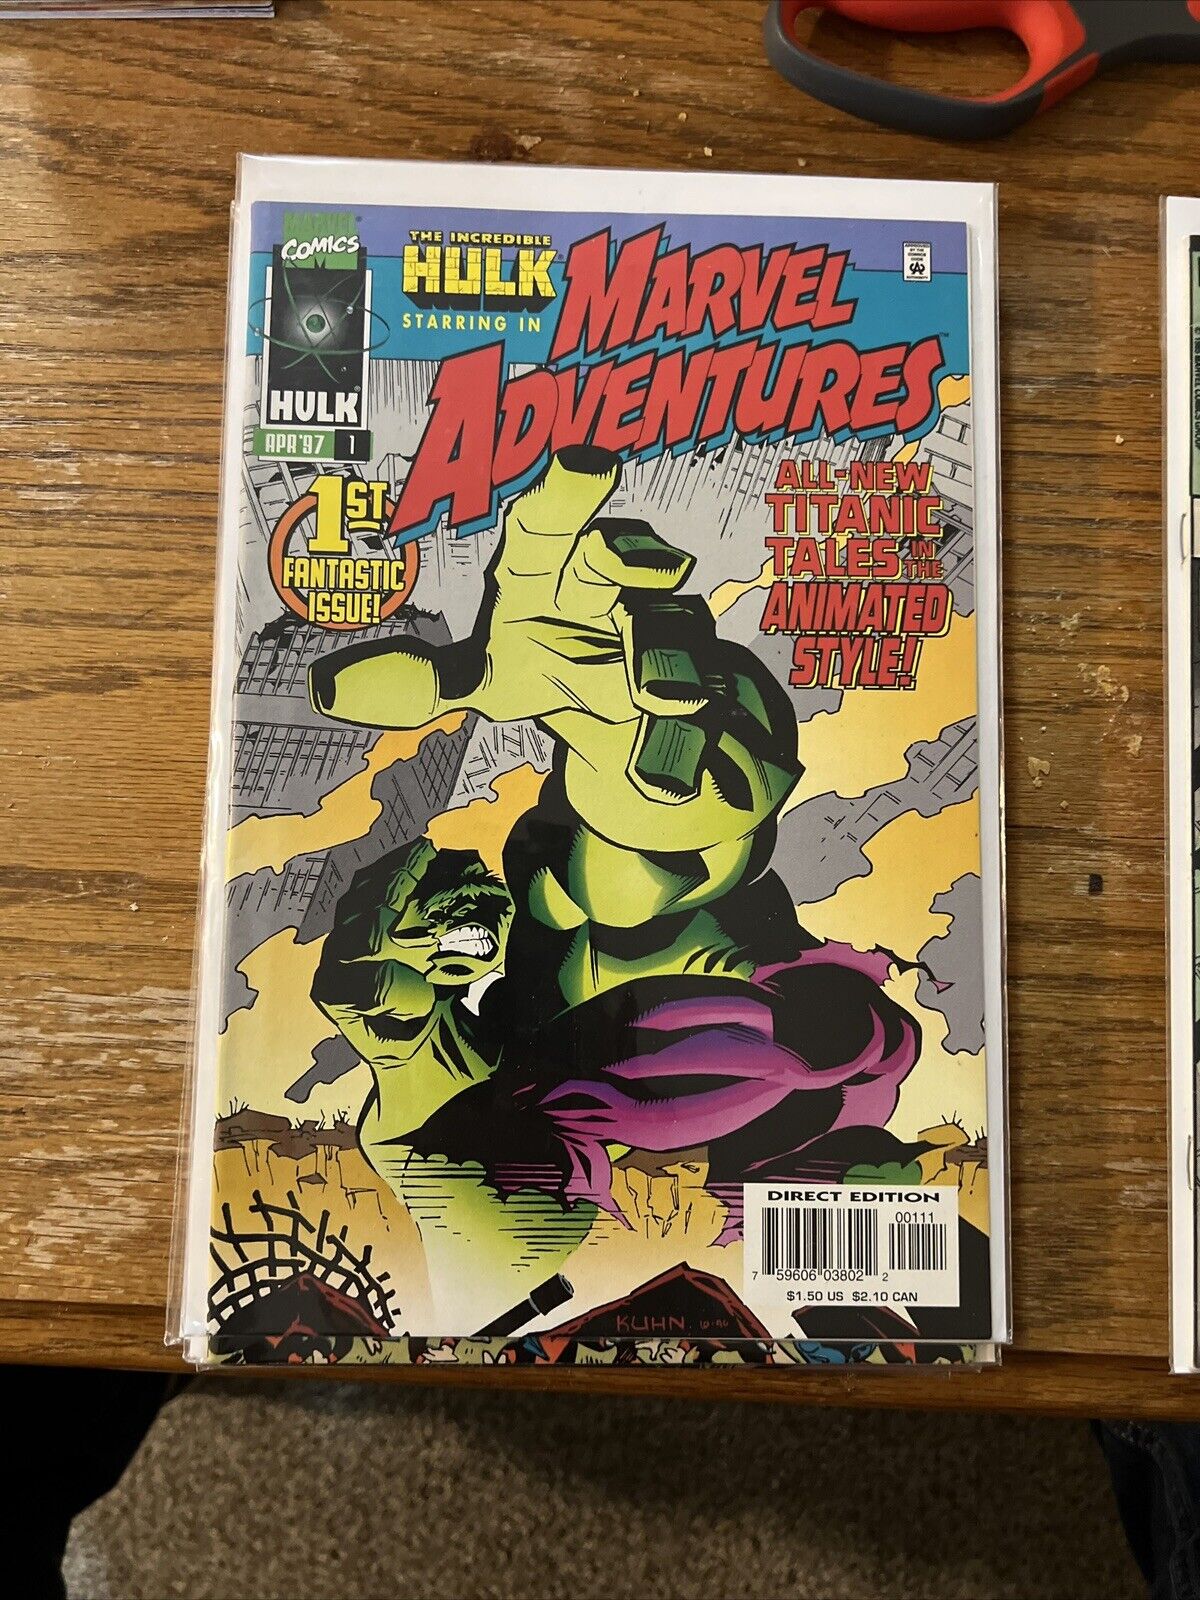 Marvel Adventures featuring the Incredible HULK #1, (1997, Marvel) 8.0